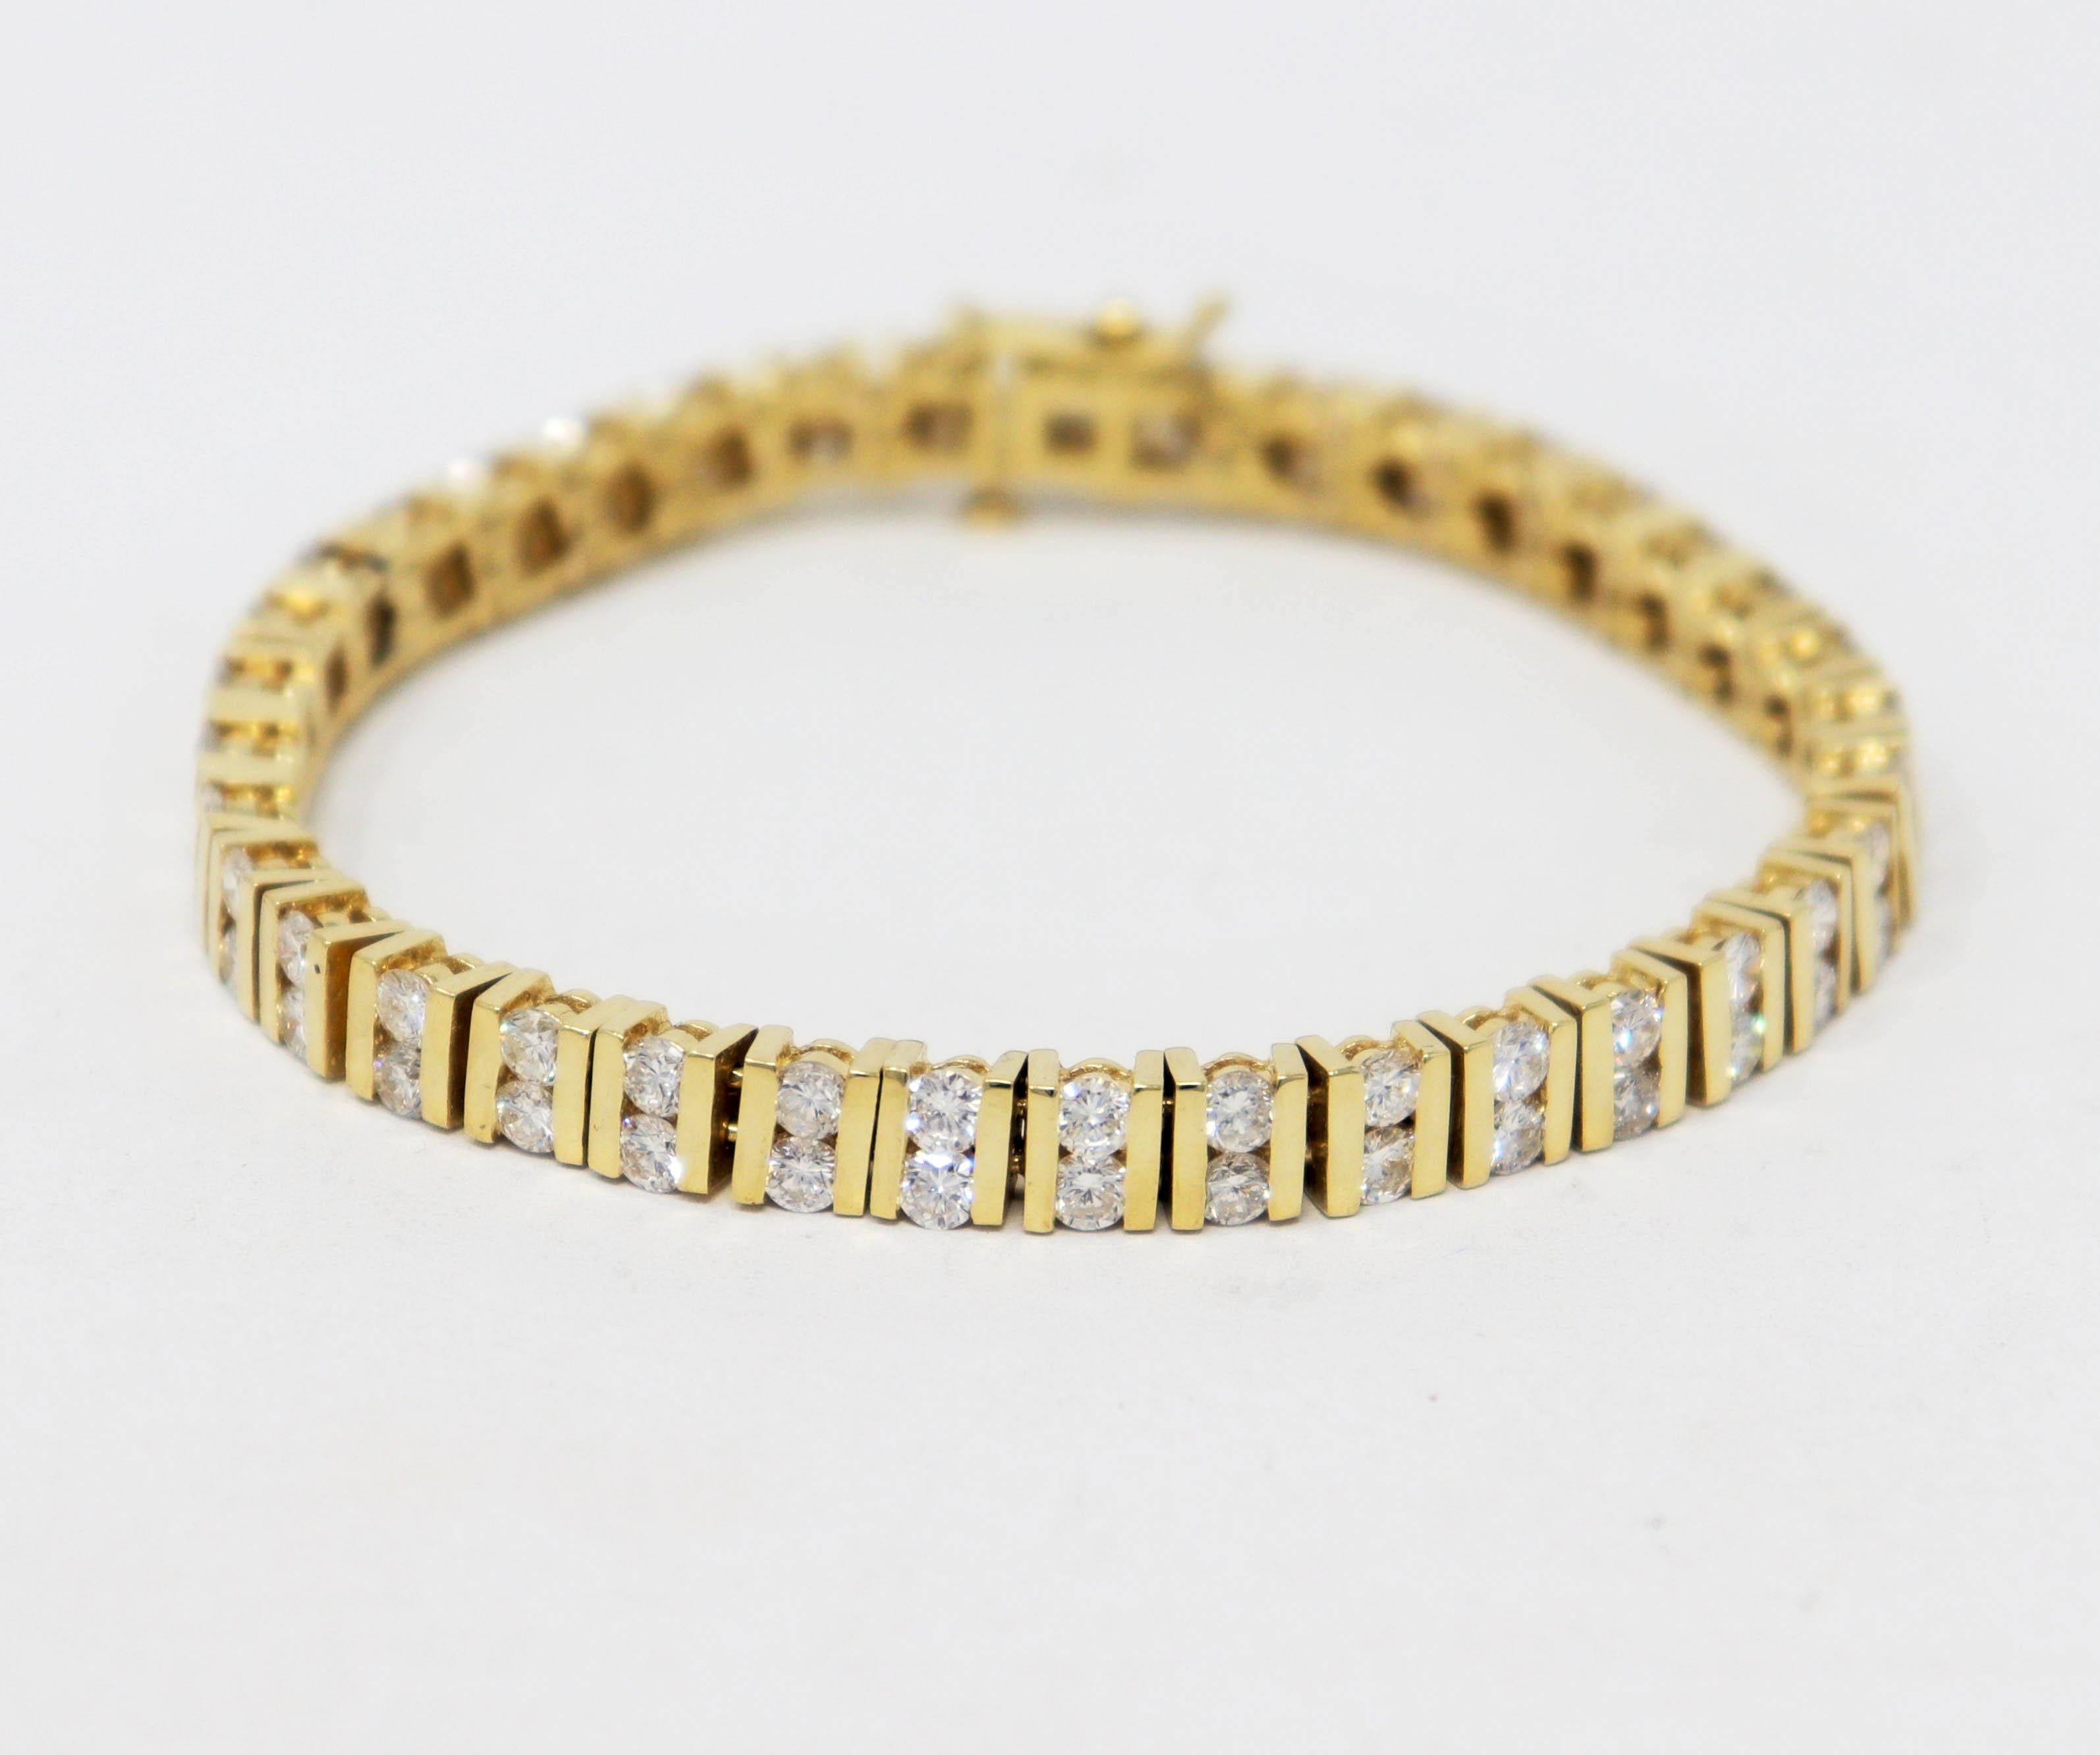 This is a stunningly beautiful diamond tennis bracelet with an elevated modern design. The icy round diamonds are paired with elegant yellow gold horizontal bar links, adding a slightly contemporary feel, while still remaining timeless. 
   
This